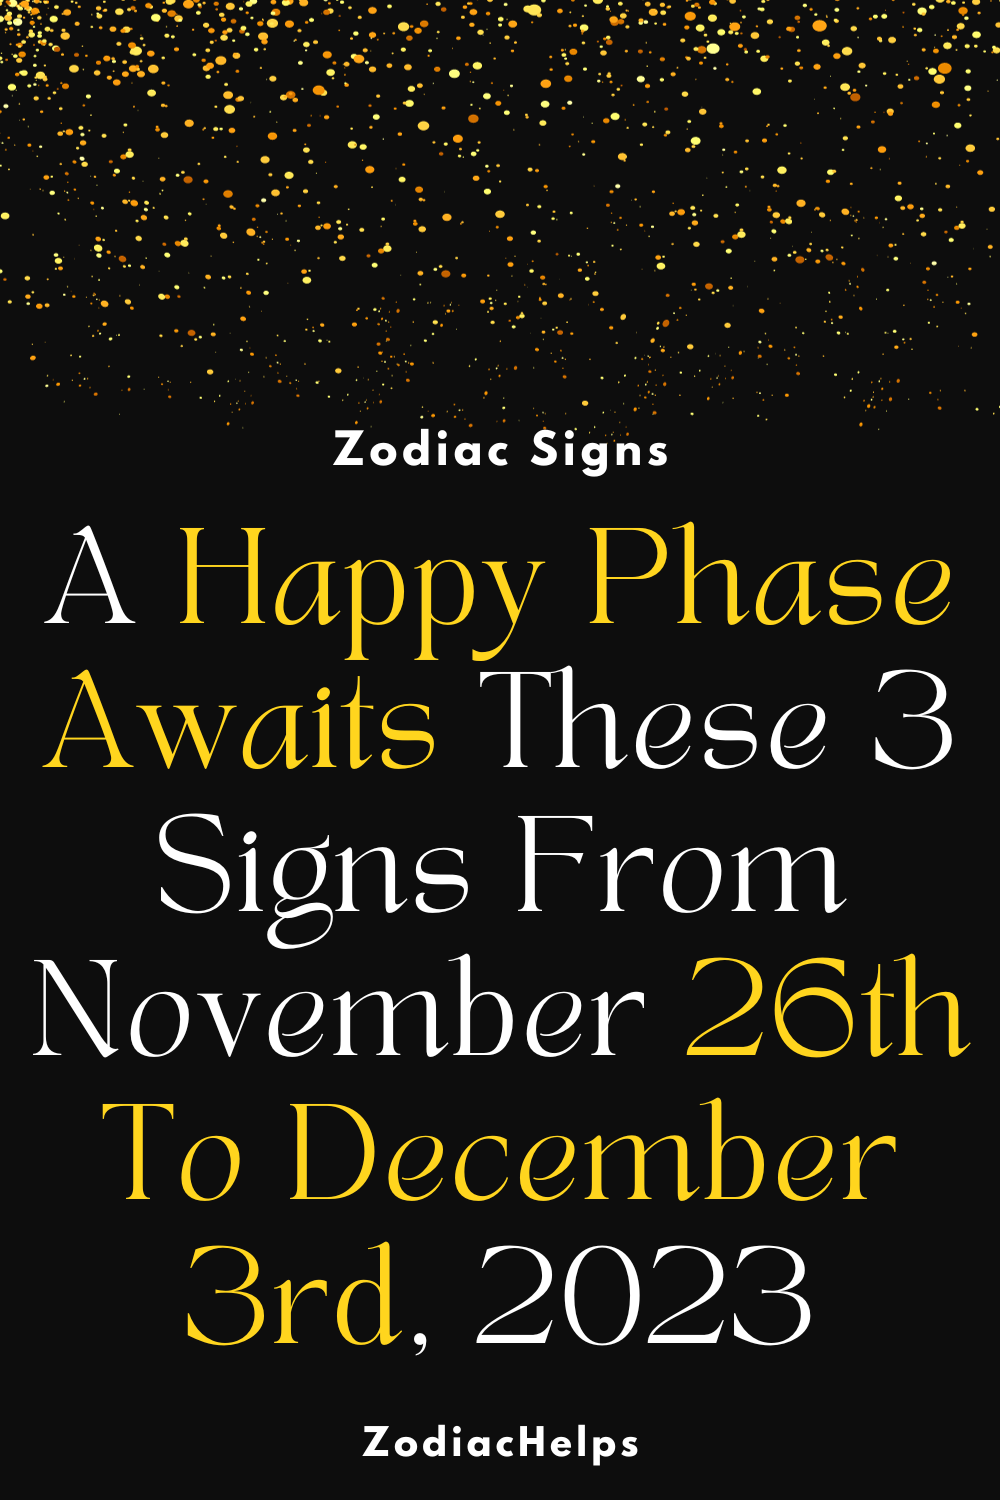 A Happy Phase Awaits These 3 Signs From November 26th To December 3rd, 2023